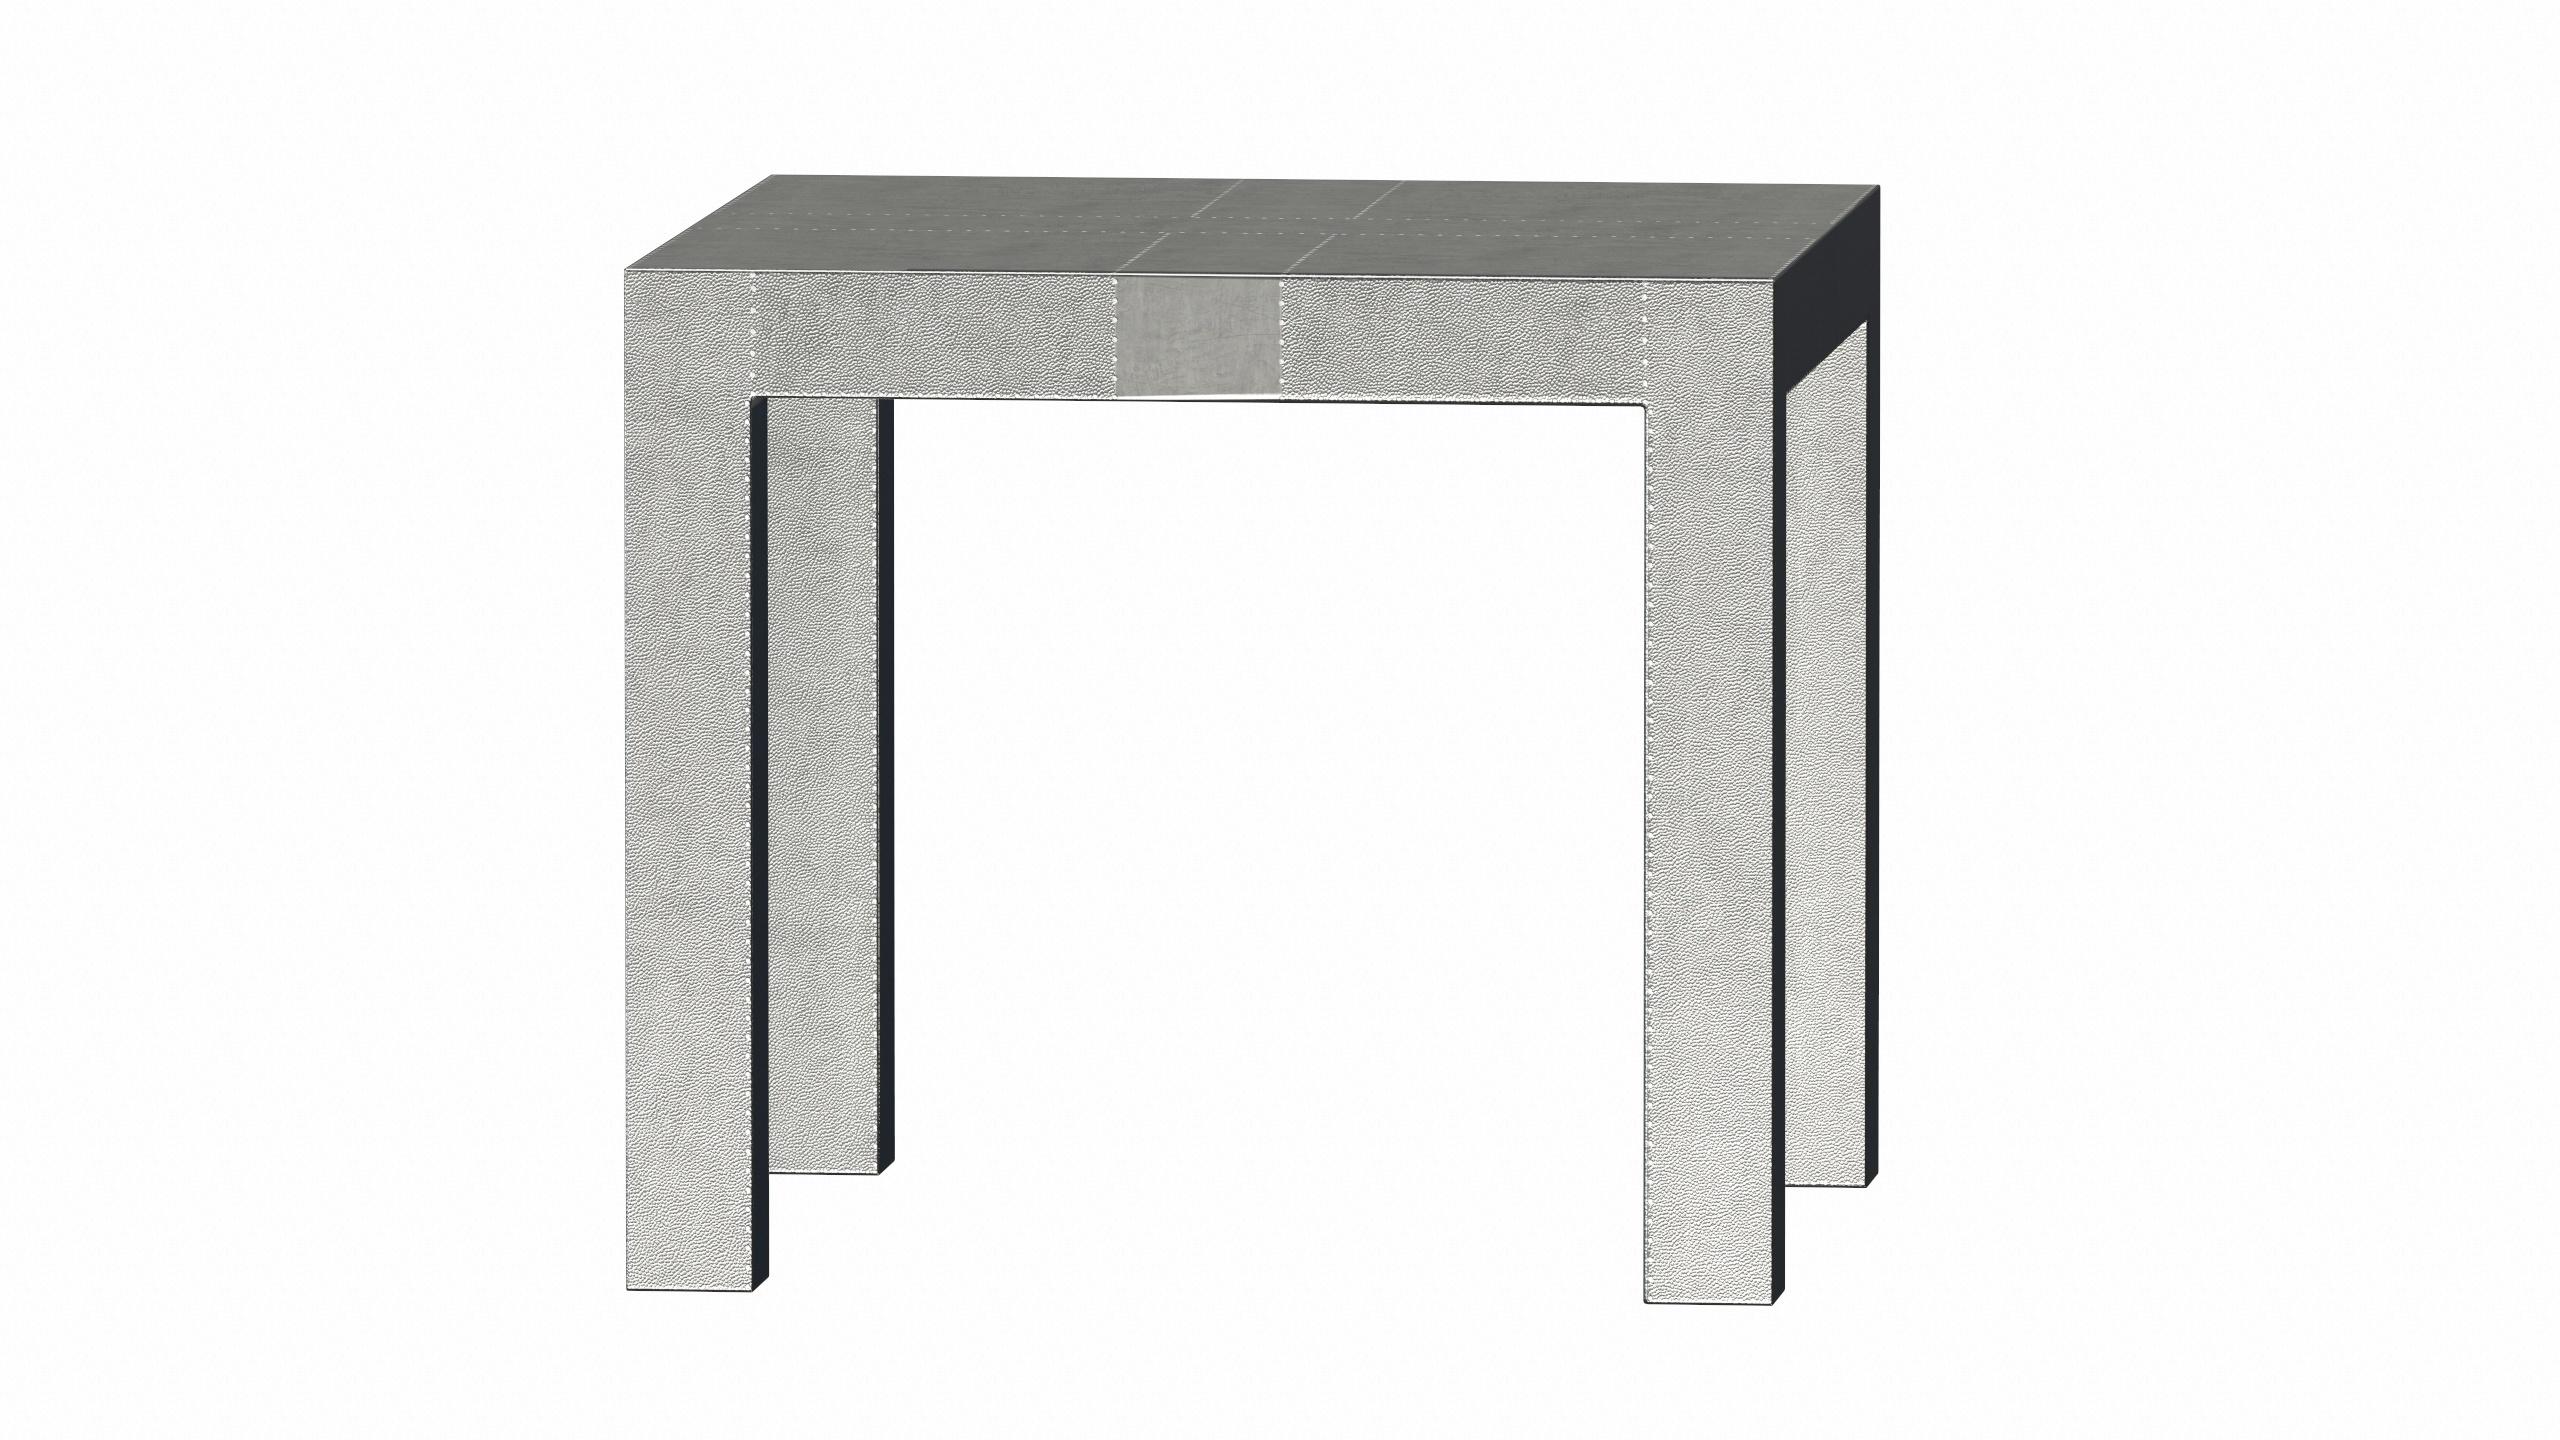 Patinated Art Deco Square Drink Center Tables Mid. Hammered White Bronze by Alison Spear For Sale